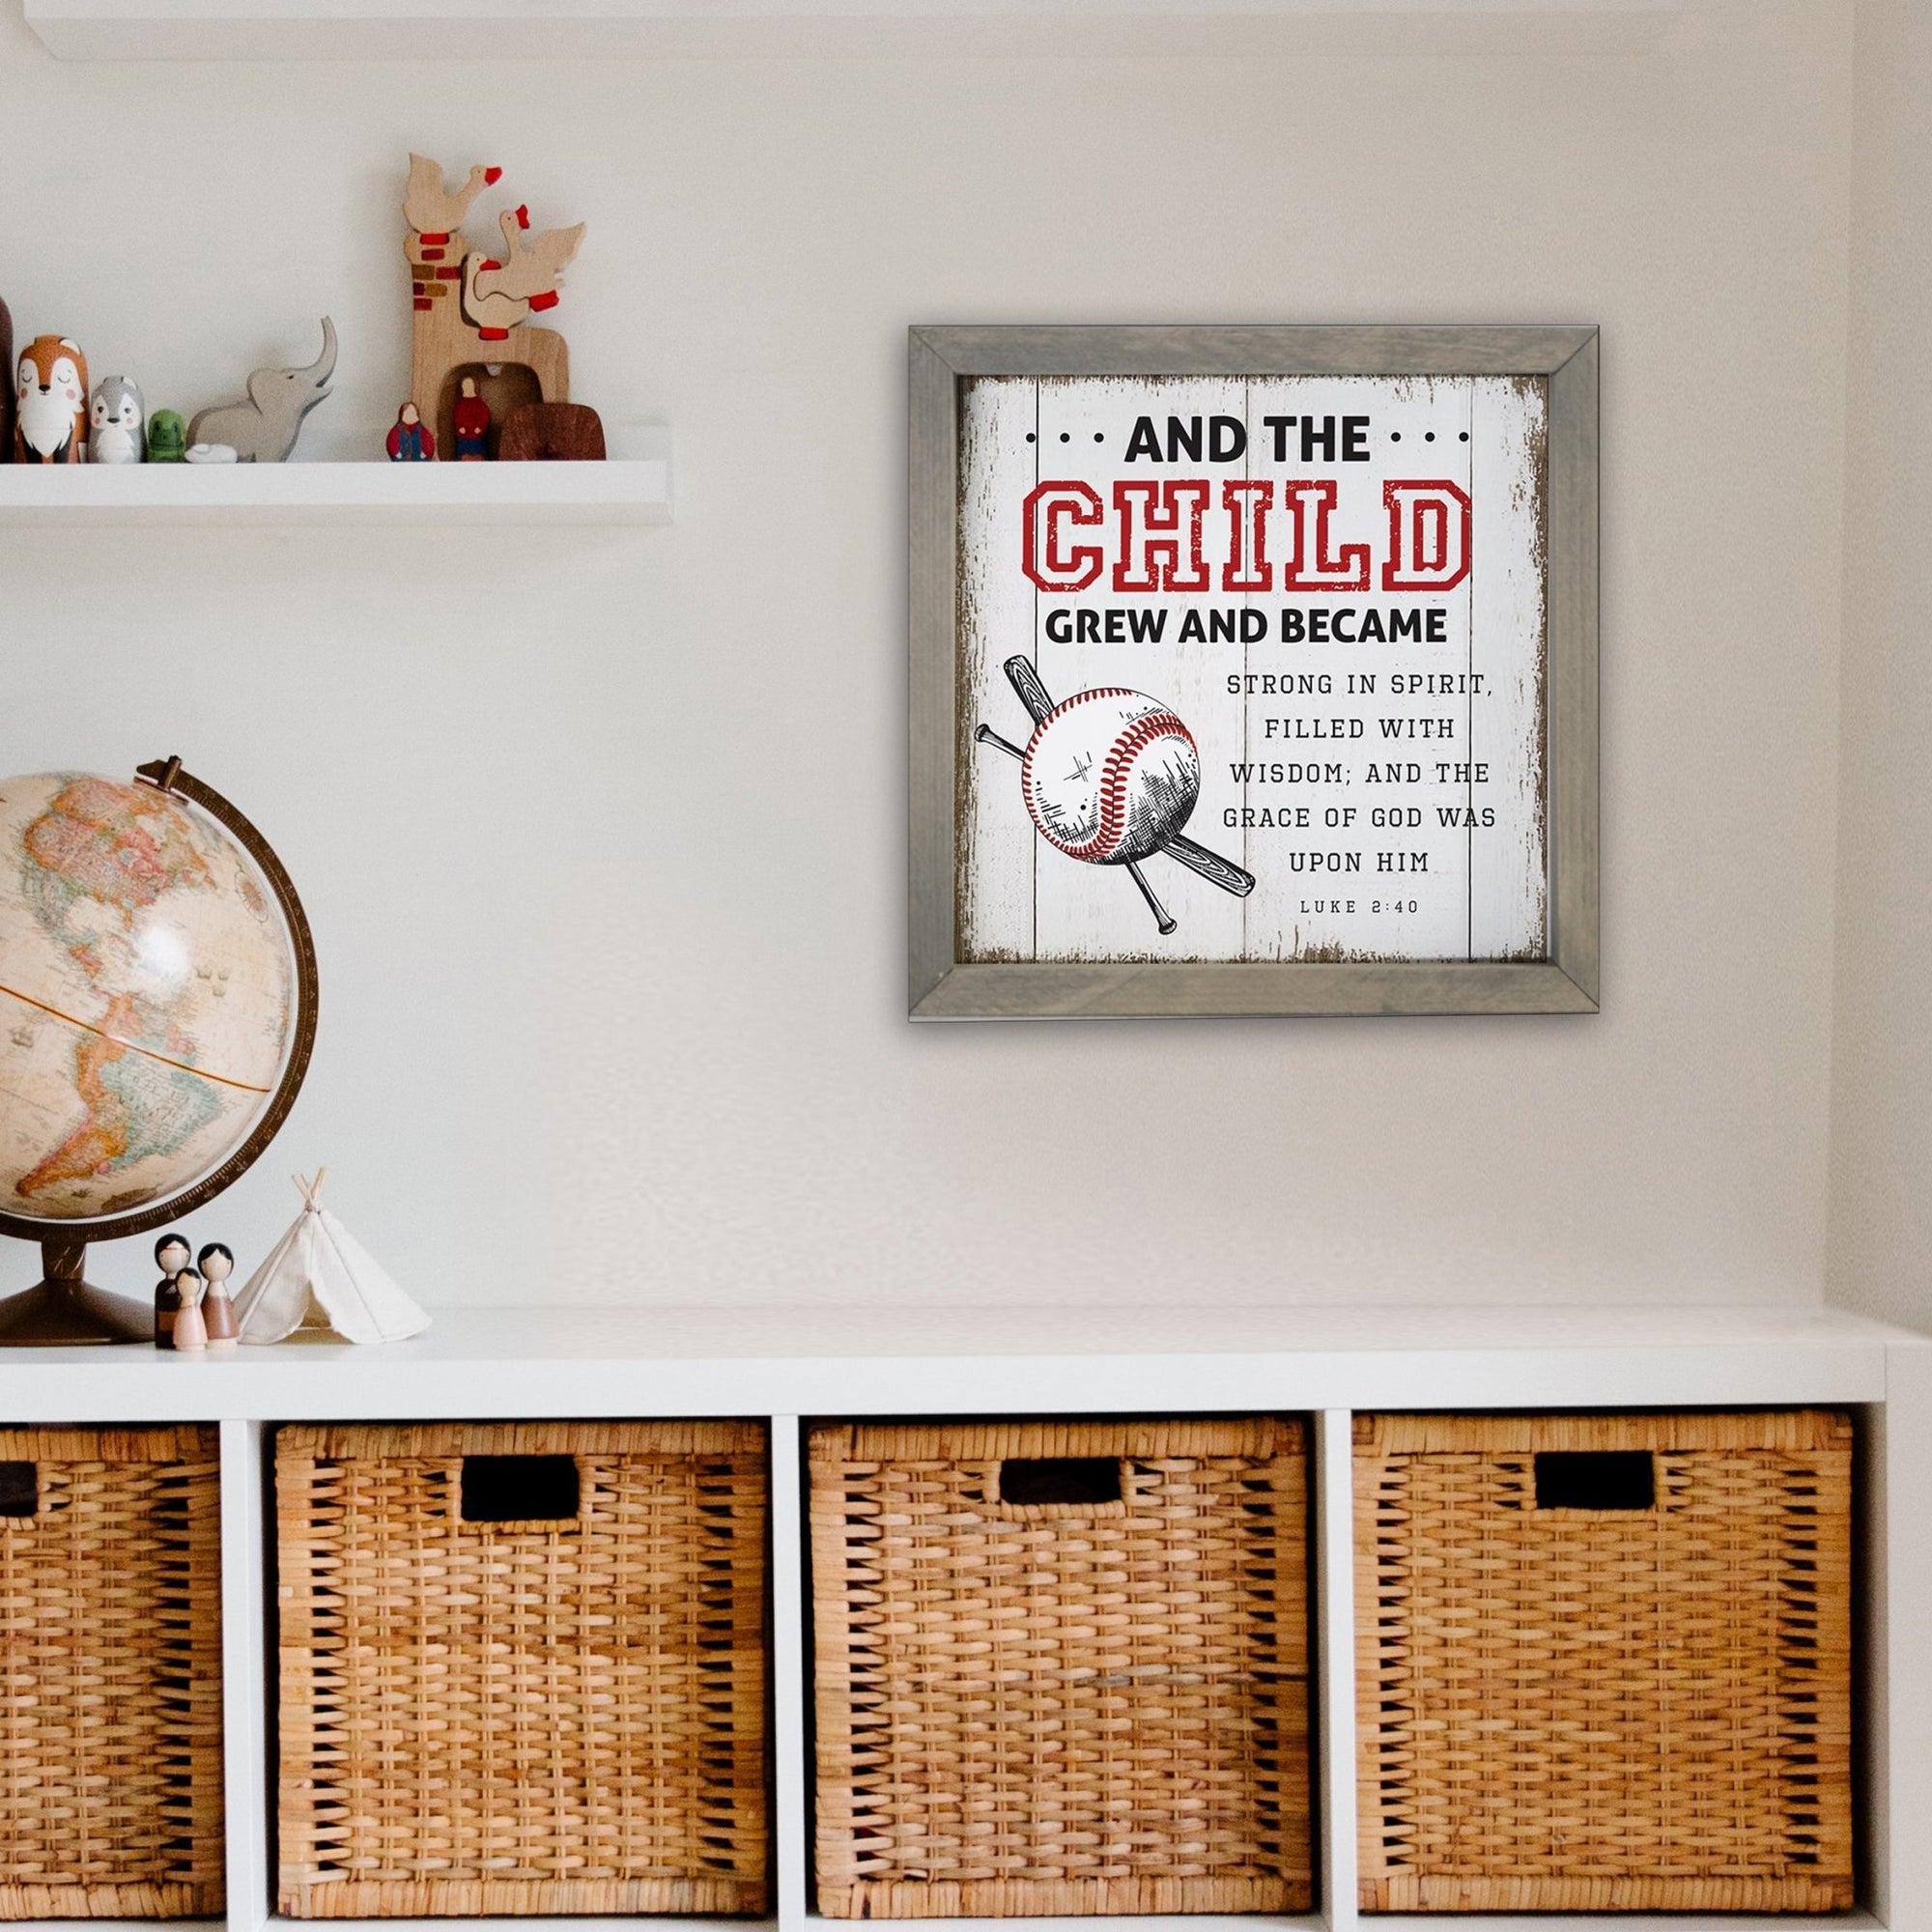 Elegant Baseball Framed Shadow Box Shelf Décor With Inspiring Bible Verses - And The Child Grew - LifeSong Milestones